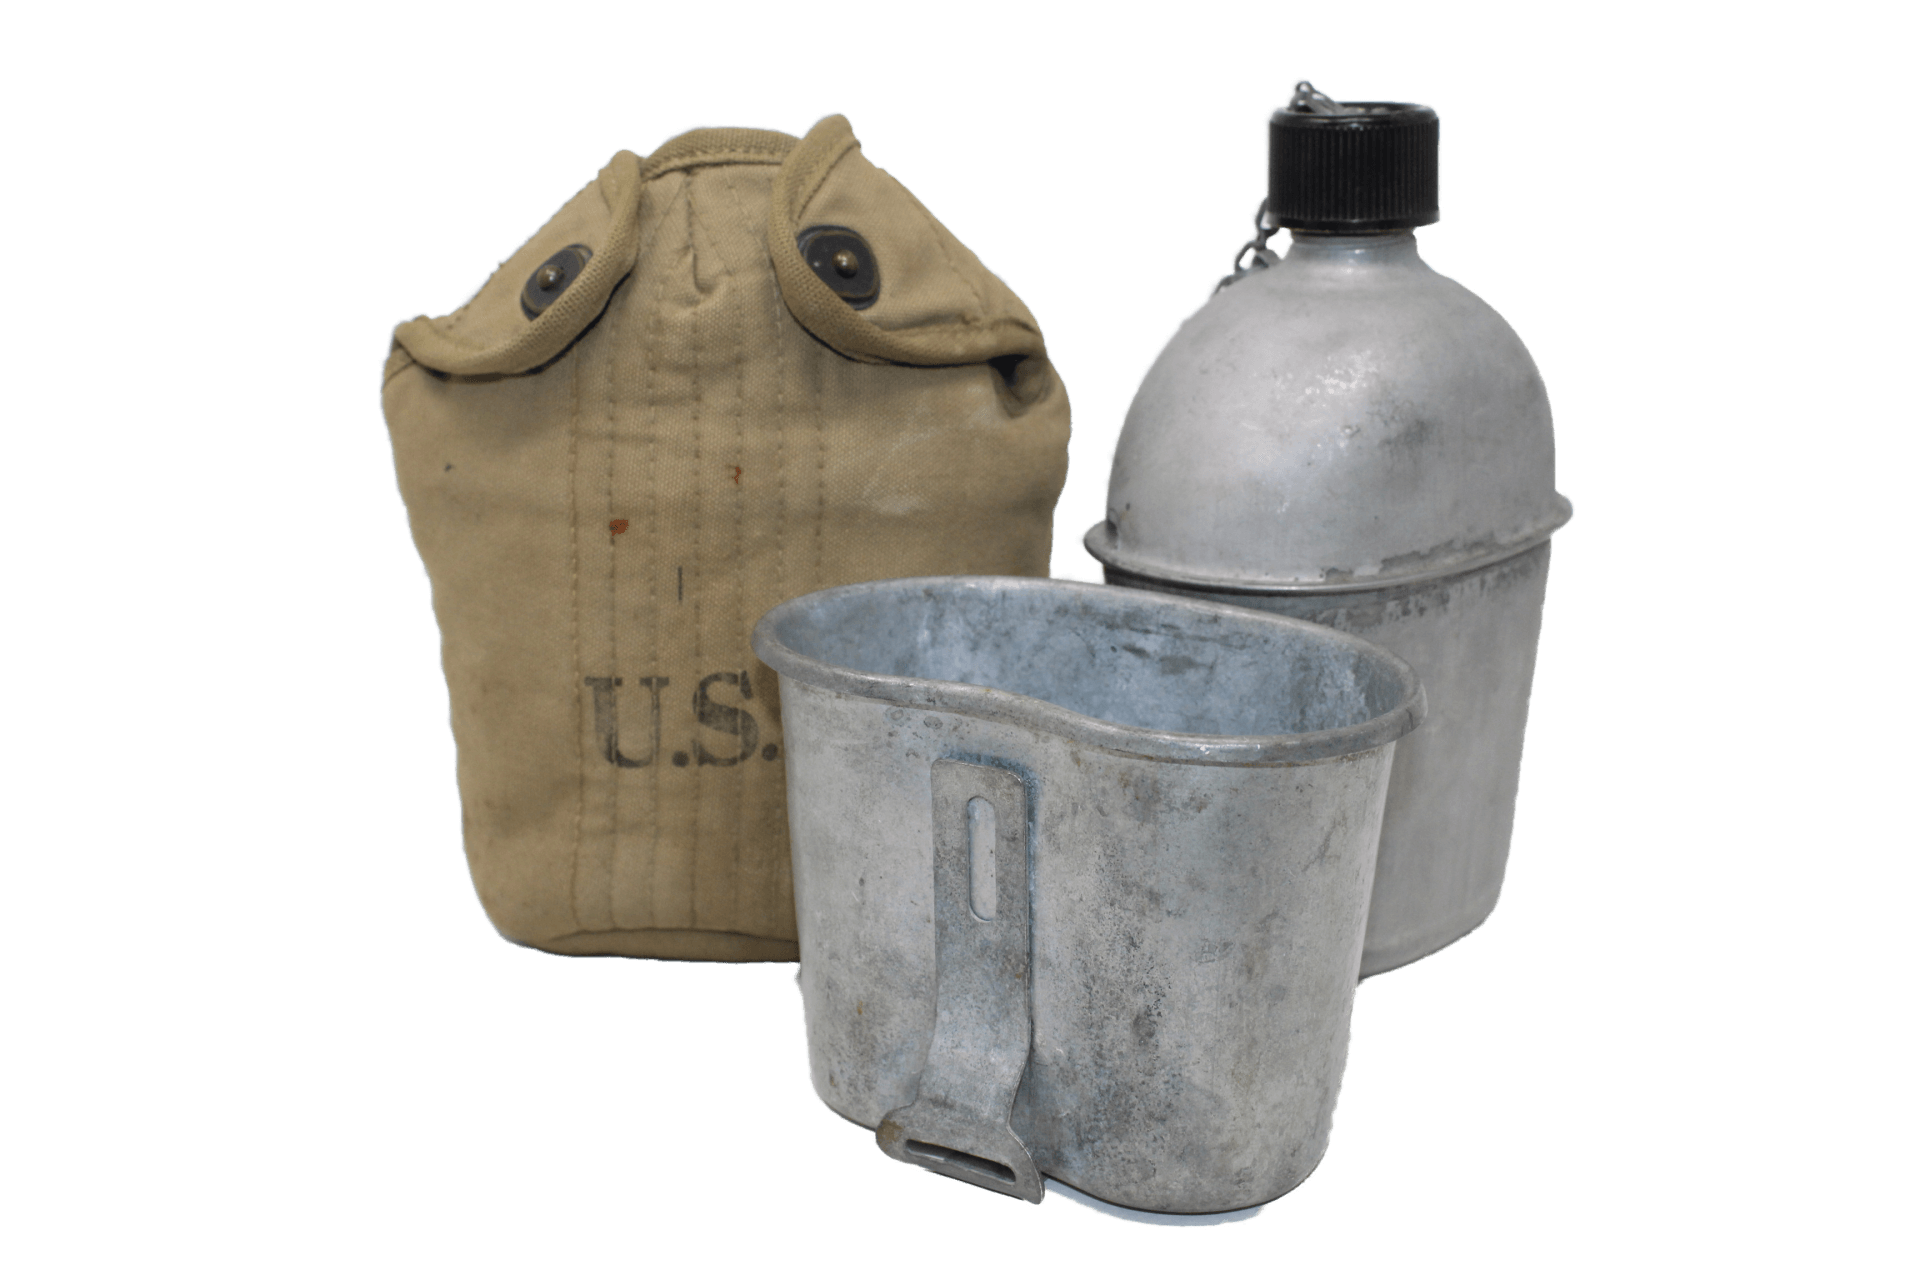 CANTEEN US ARMY “REINFORCED” 1943